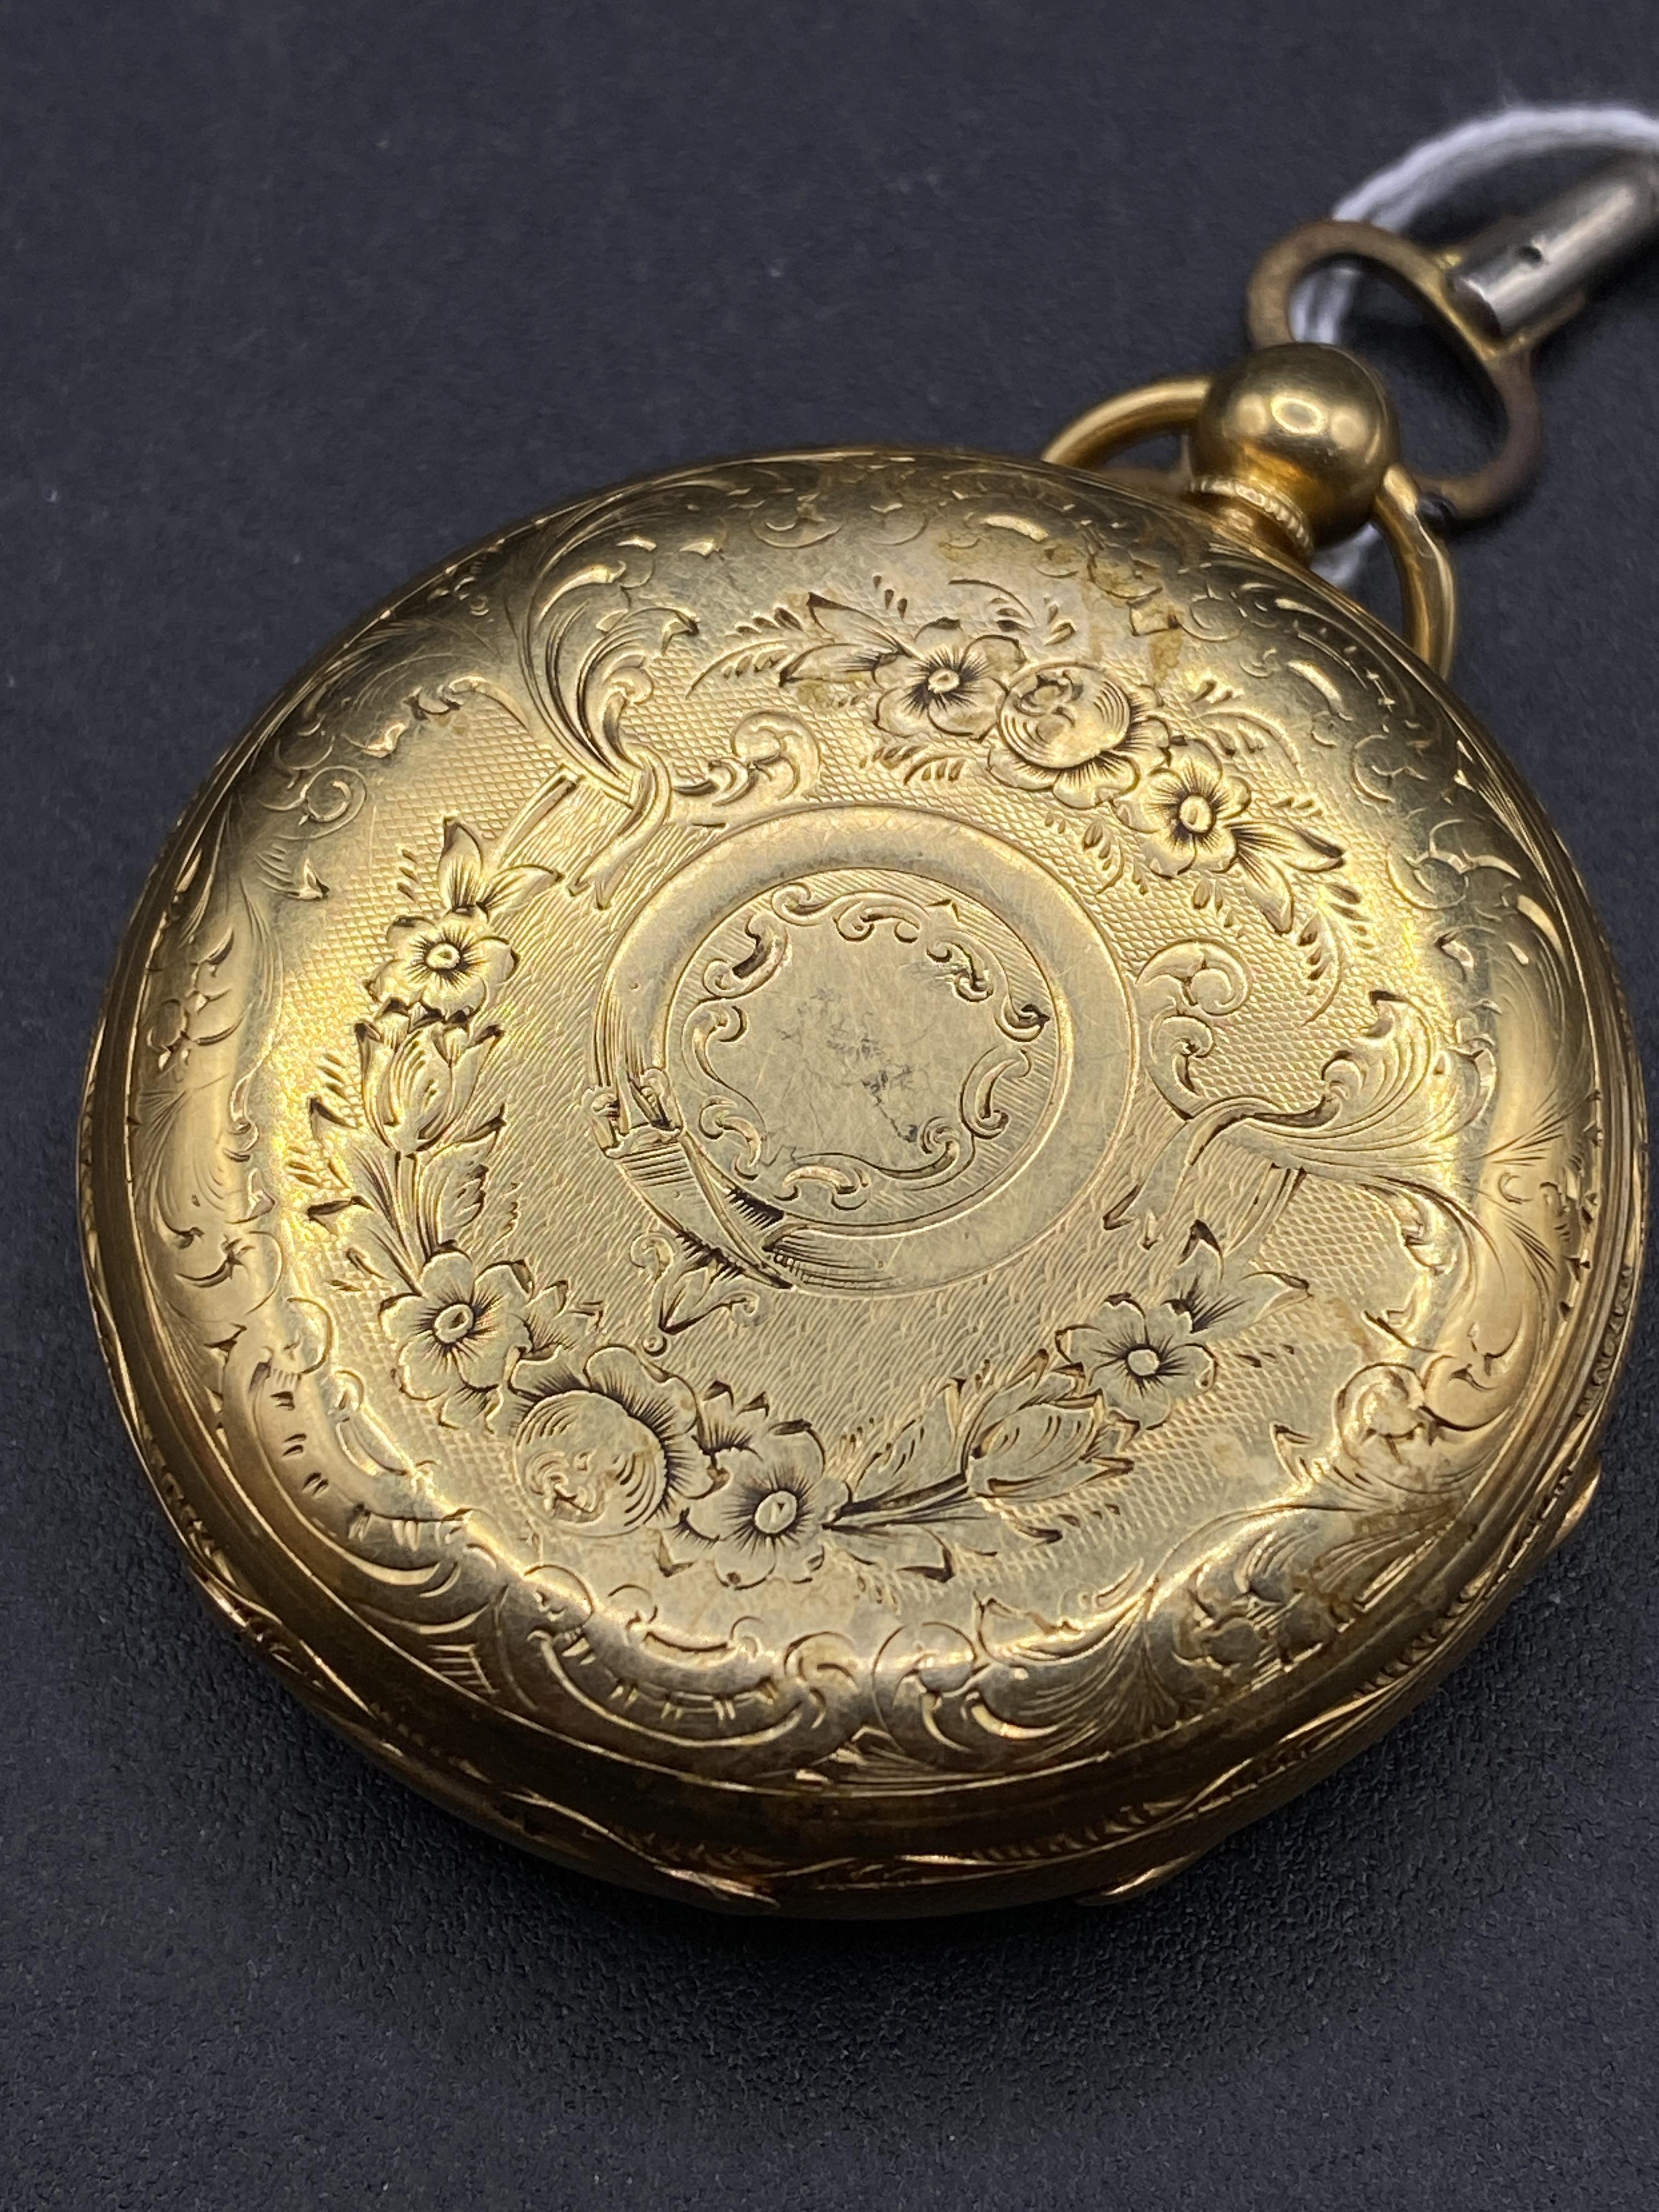 A ATTRACTIVE FLORAL ENGRAVED GENTS POCKET WATCH 18CT GOLD WITH GOLD COLOURED FACE SECONDS SWEEP - Image 4 of 5